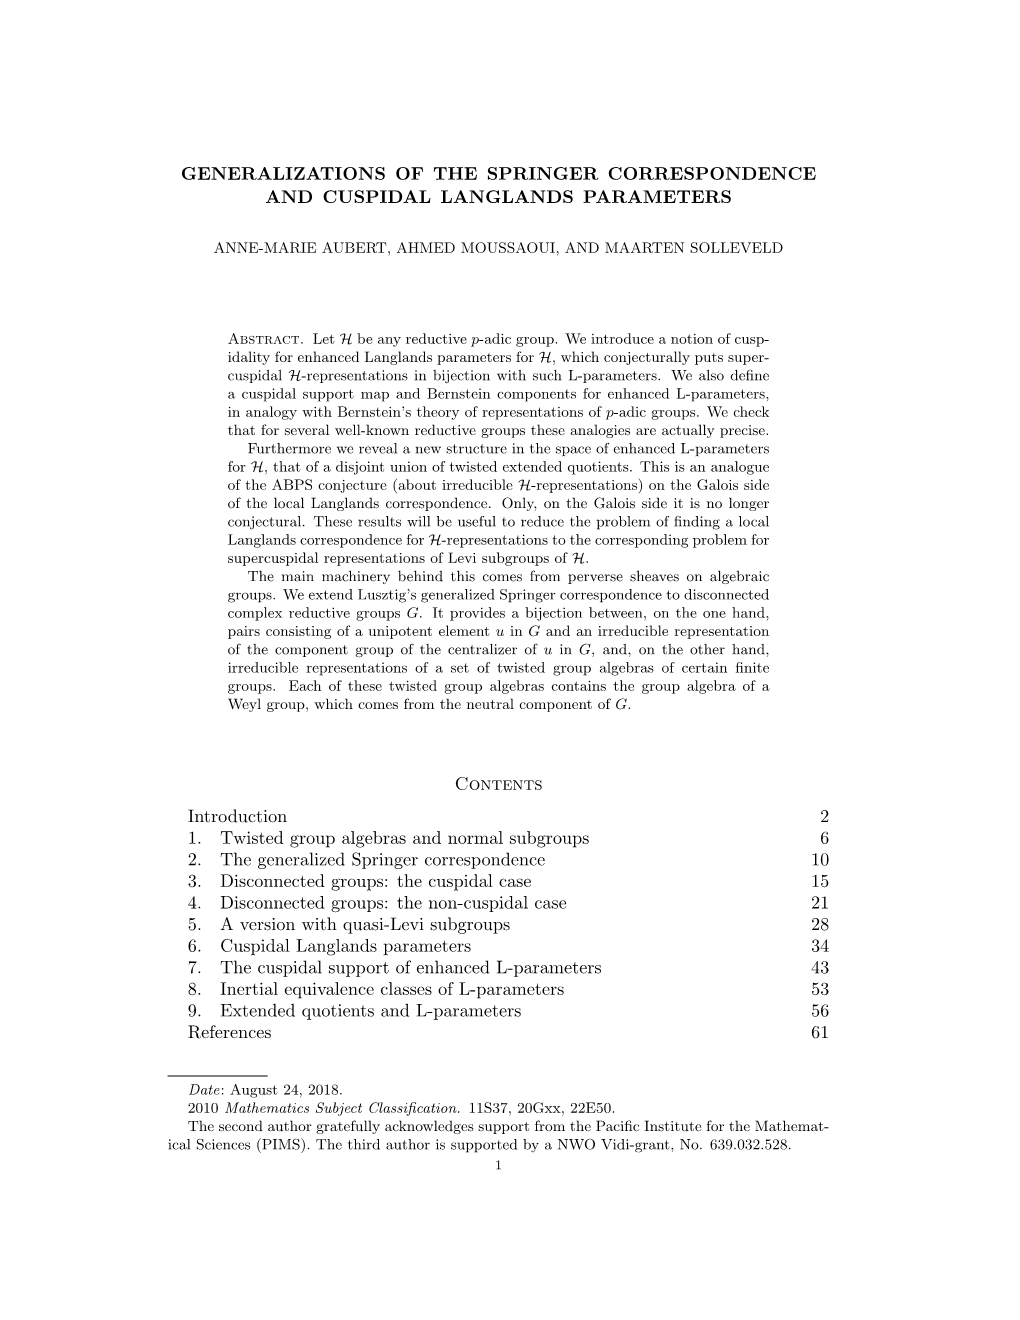 Generalizations of the Springer Correspondence and Cuspidal Langlands Parameters